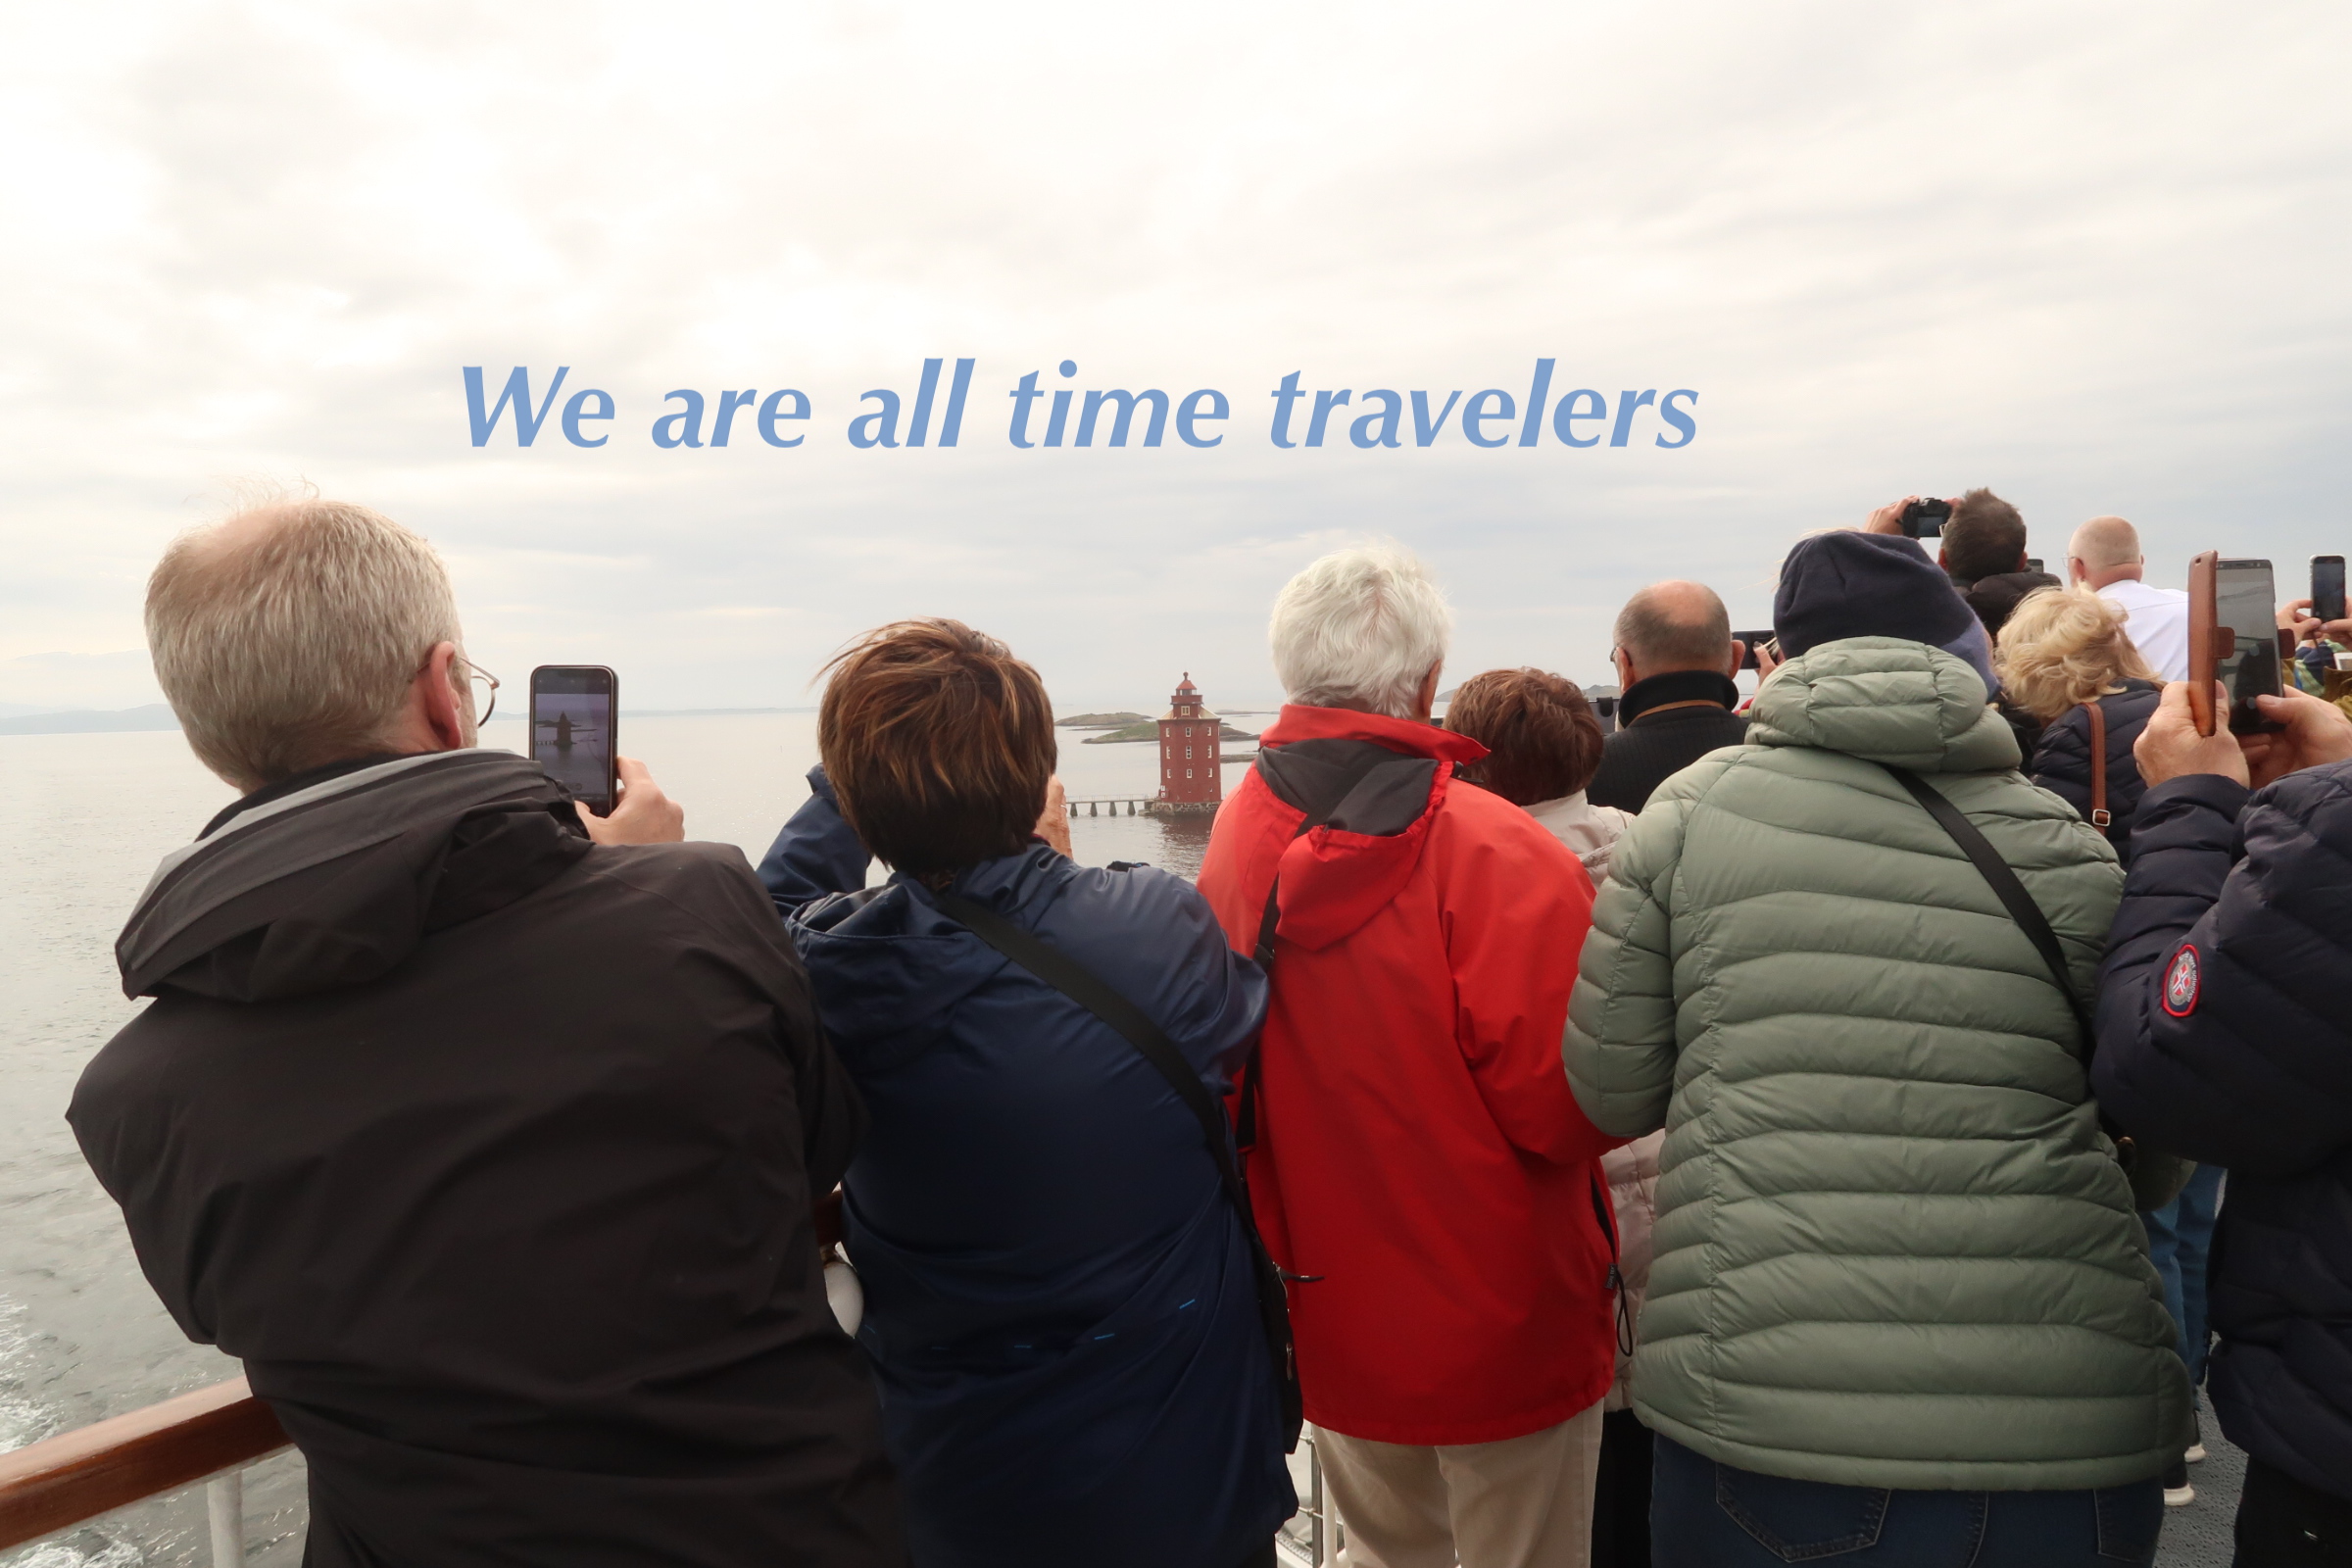 We are all time travelers